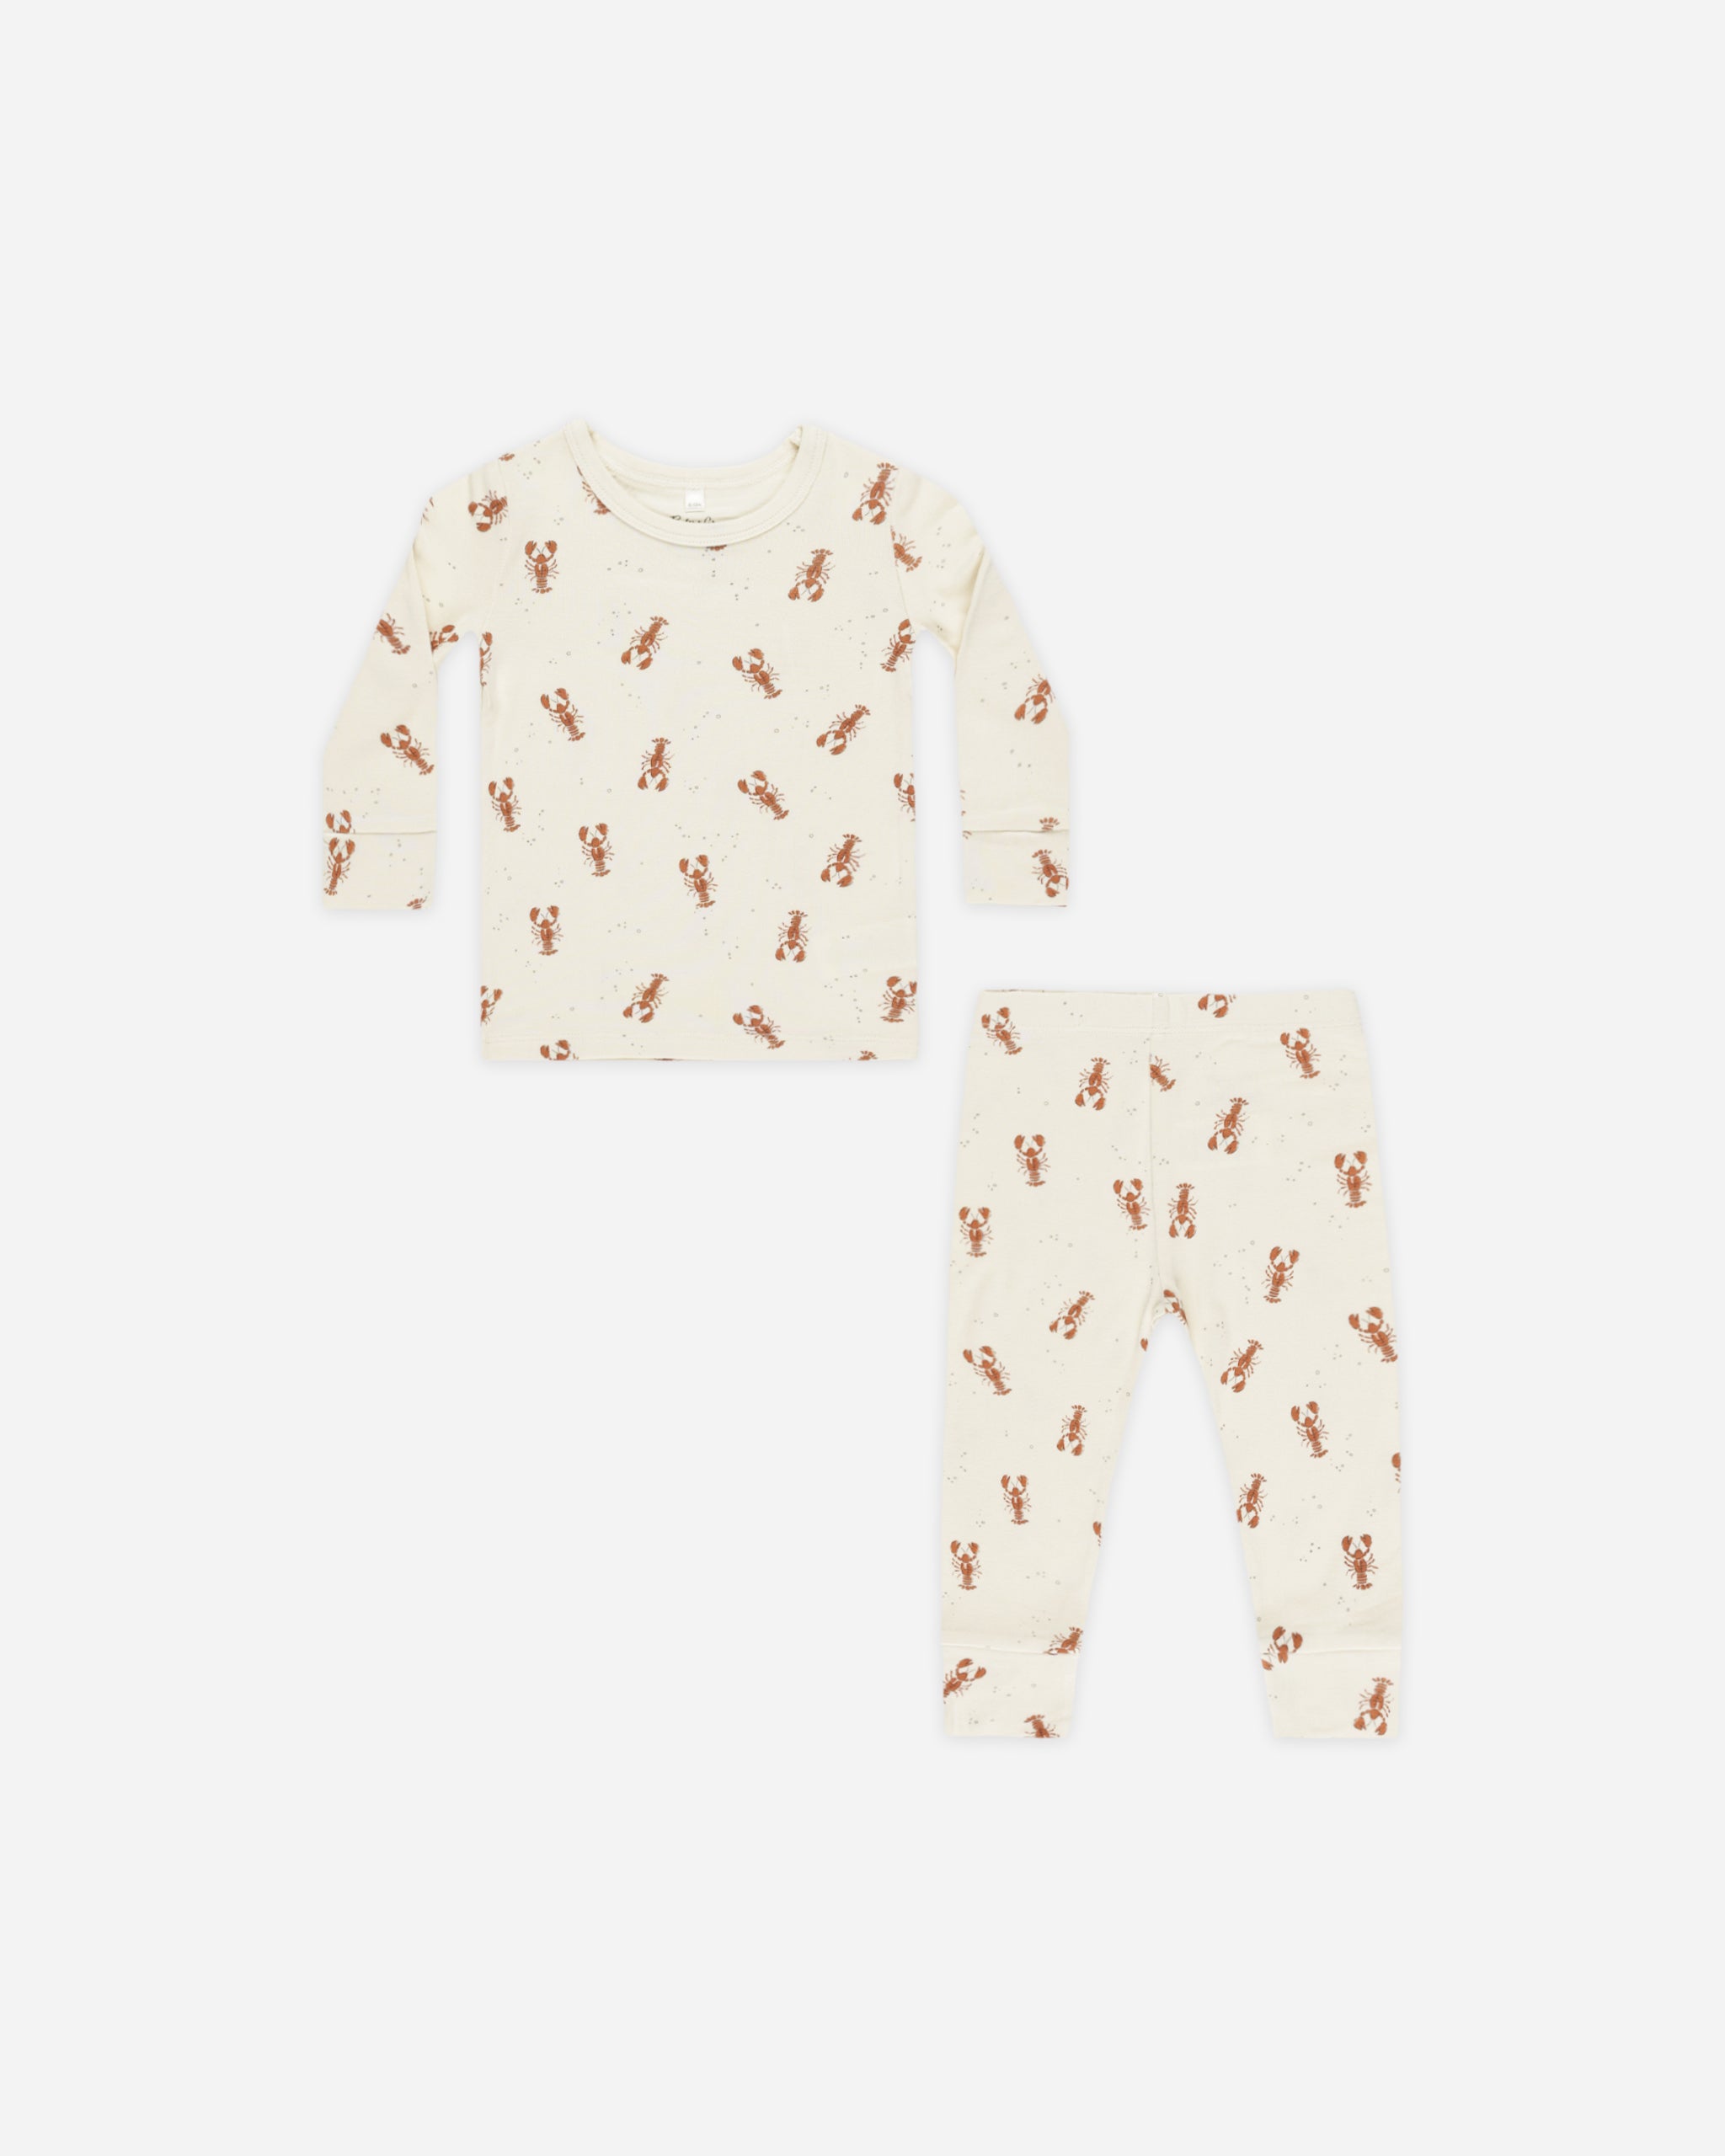 Long Sleeve Pajamas || Lobsters - Rylee + Cru | Kids Clothes | Trendy Baby Clothes | Modern Infant Outfits |